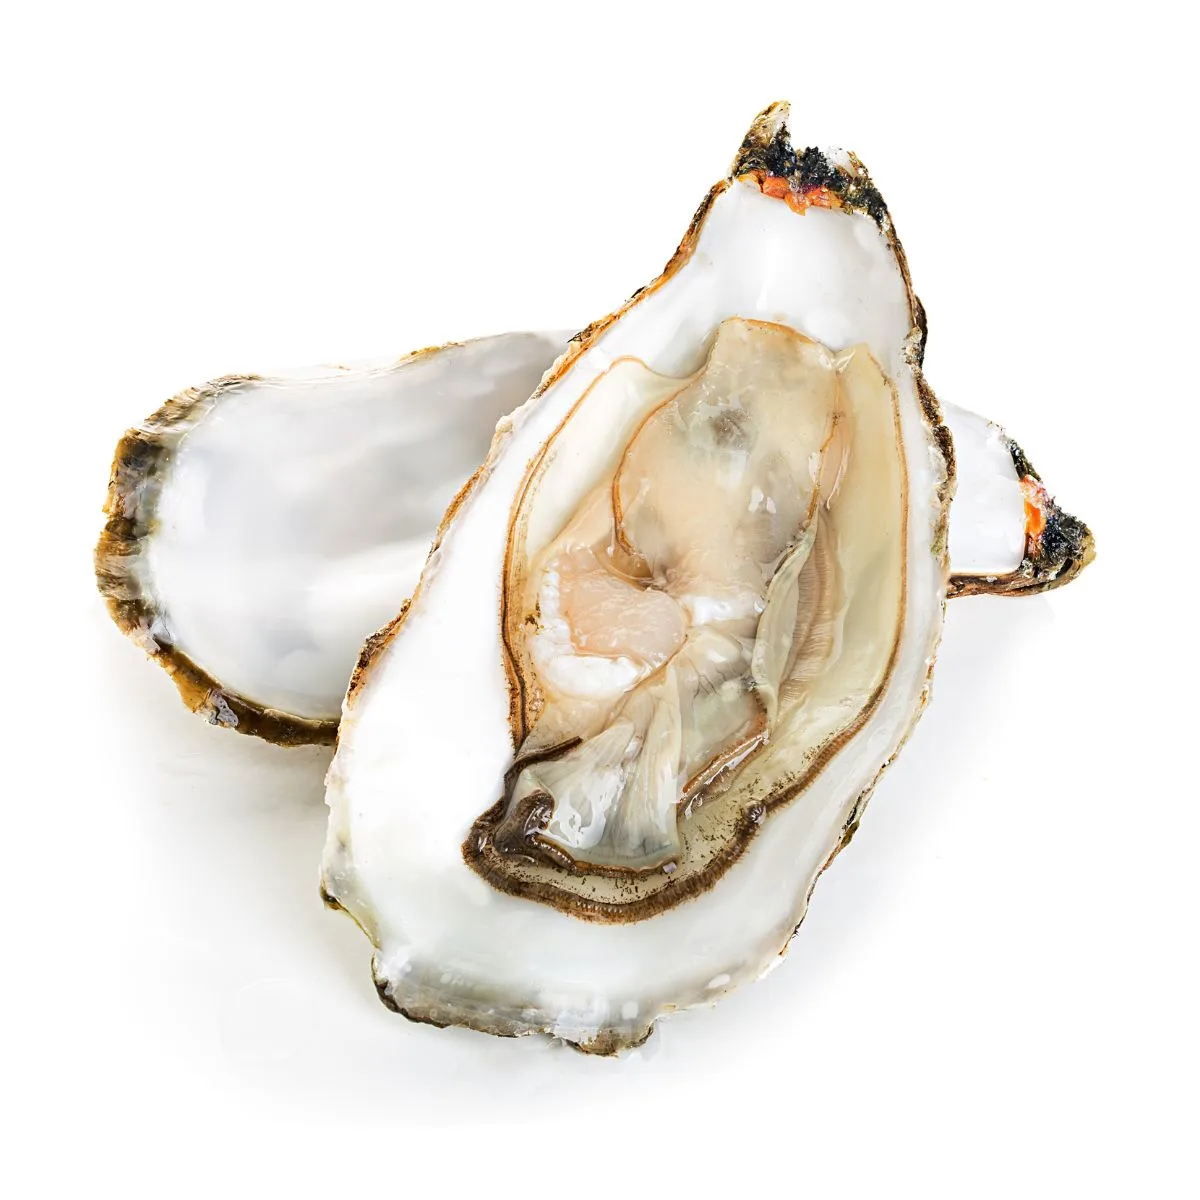 Oysters on a white background.